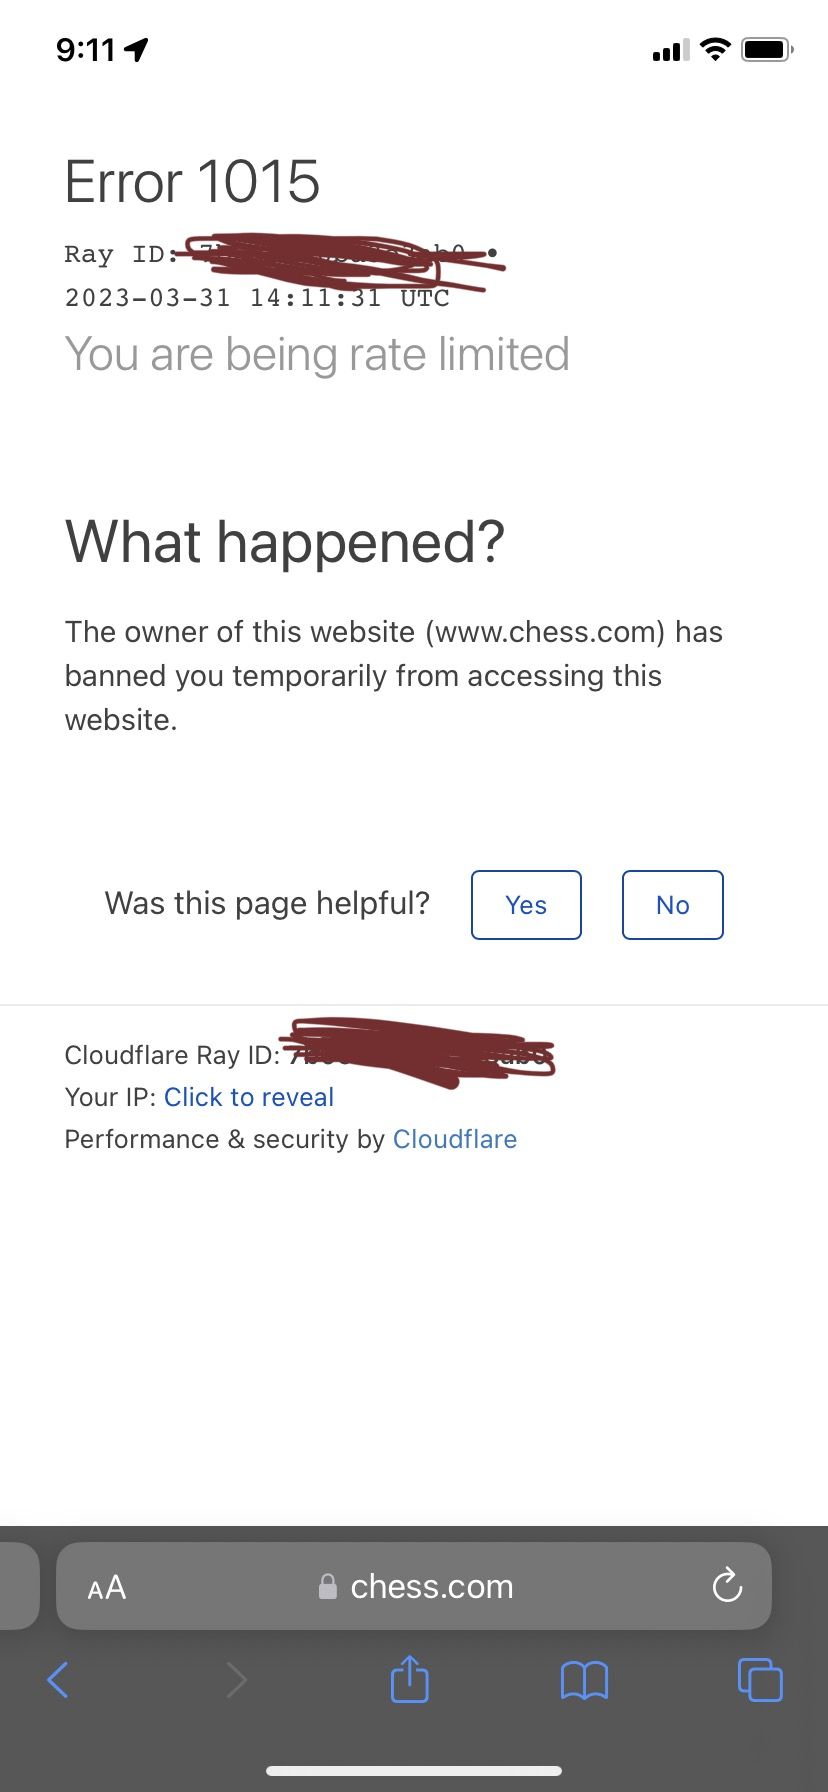 Login issues and rate limited? - Chess Forums 